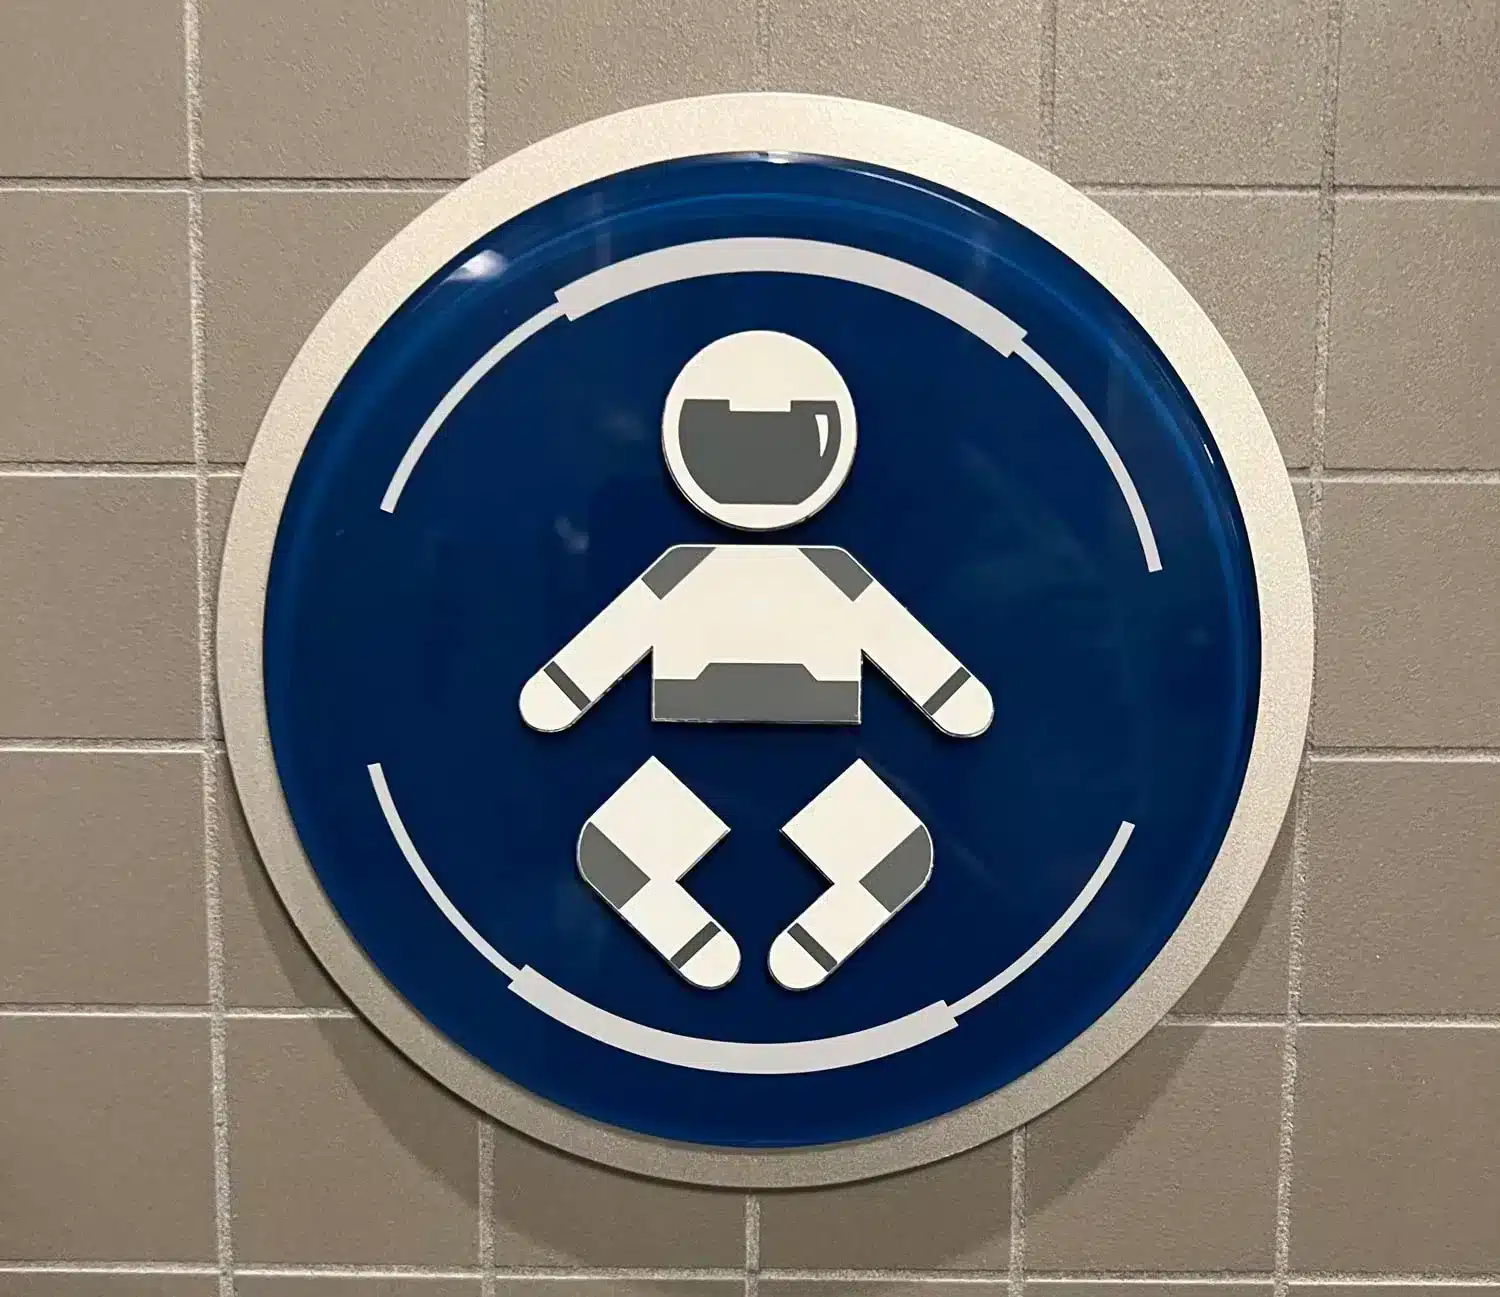 Baby Changing Station Sign at Disney World - Space 220